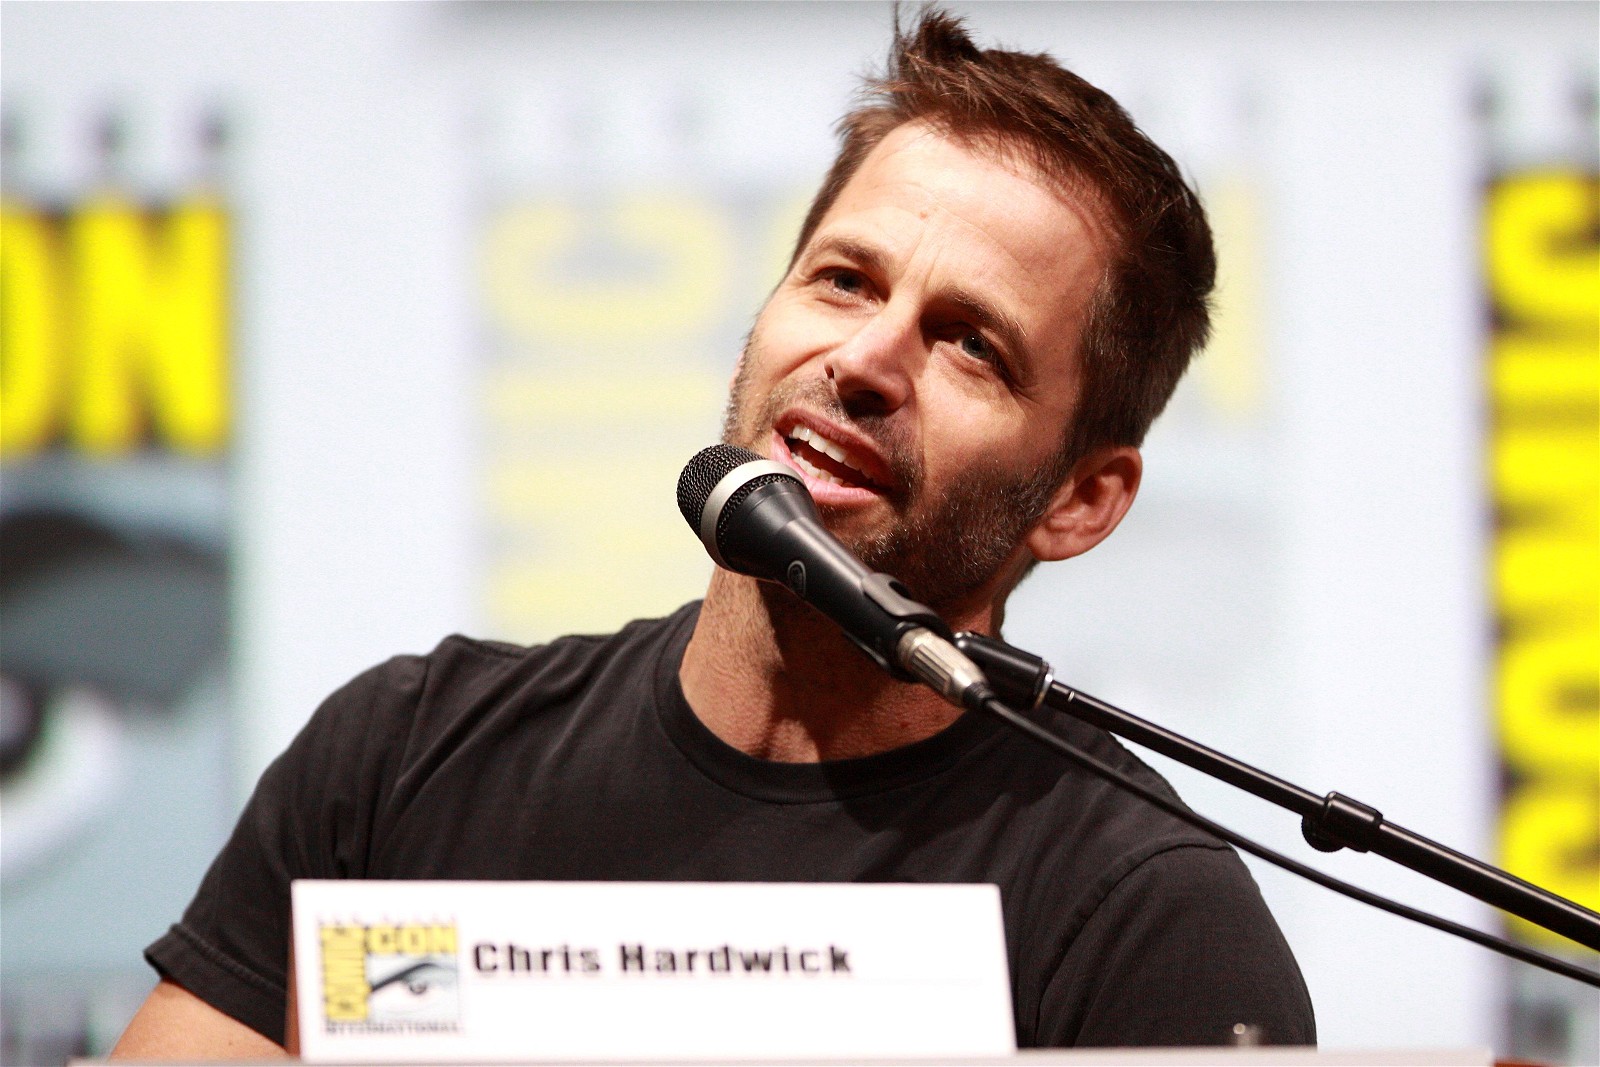 Zack Snyder speaking to the audience at the 2013 San Diego Comic Con International